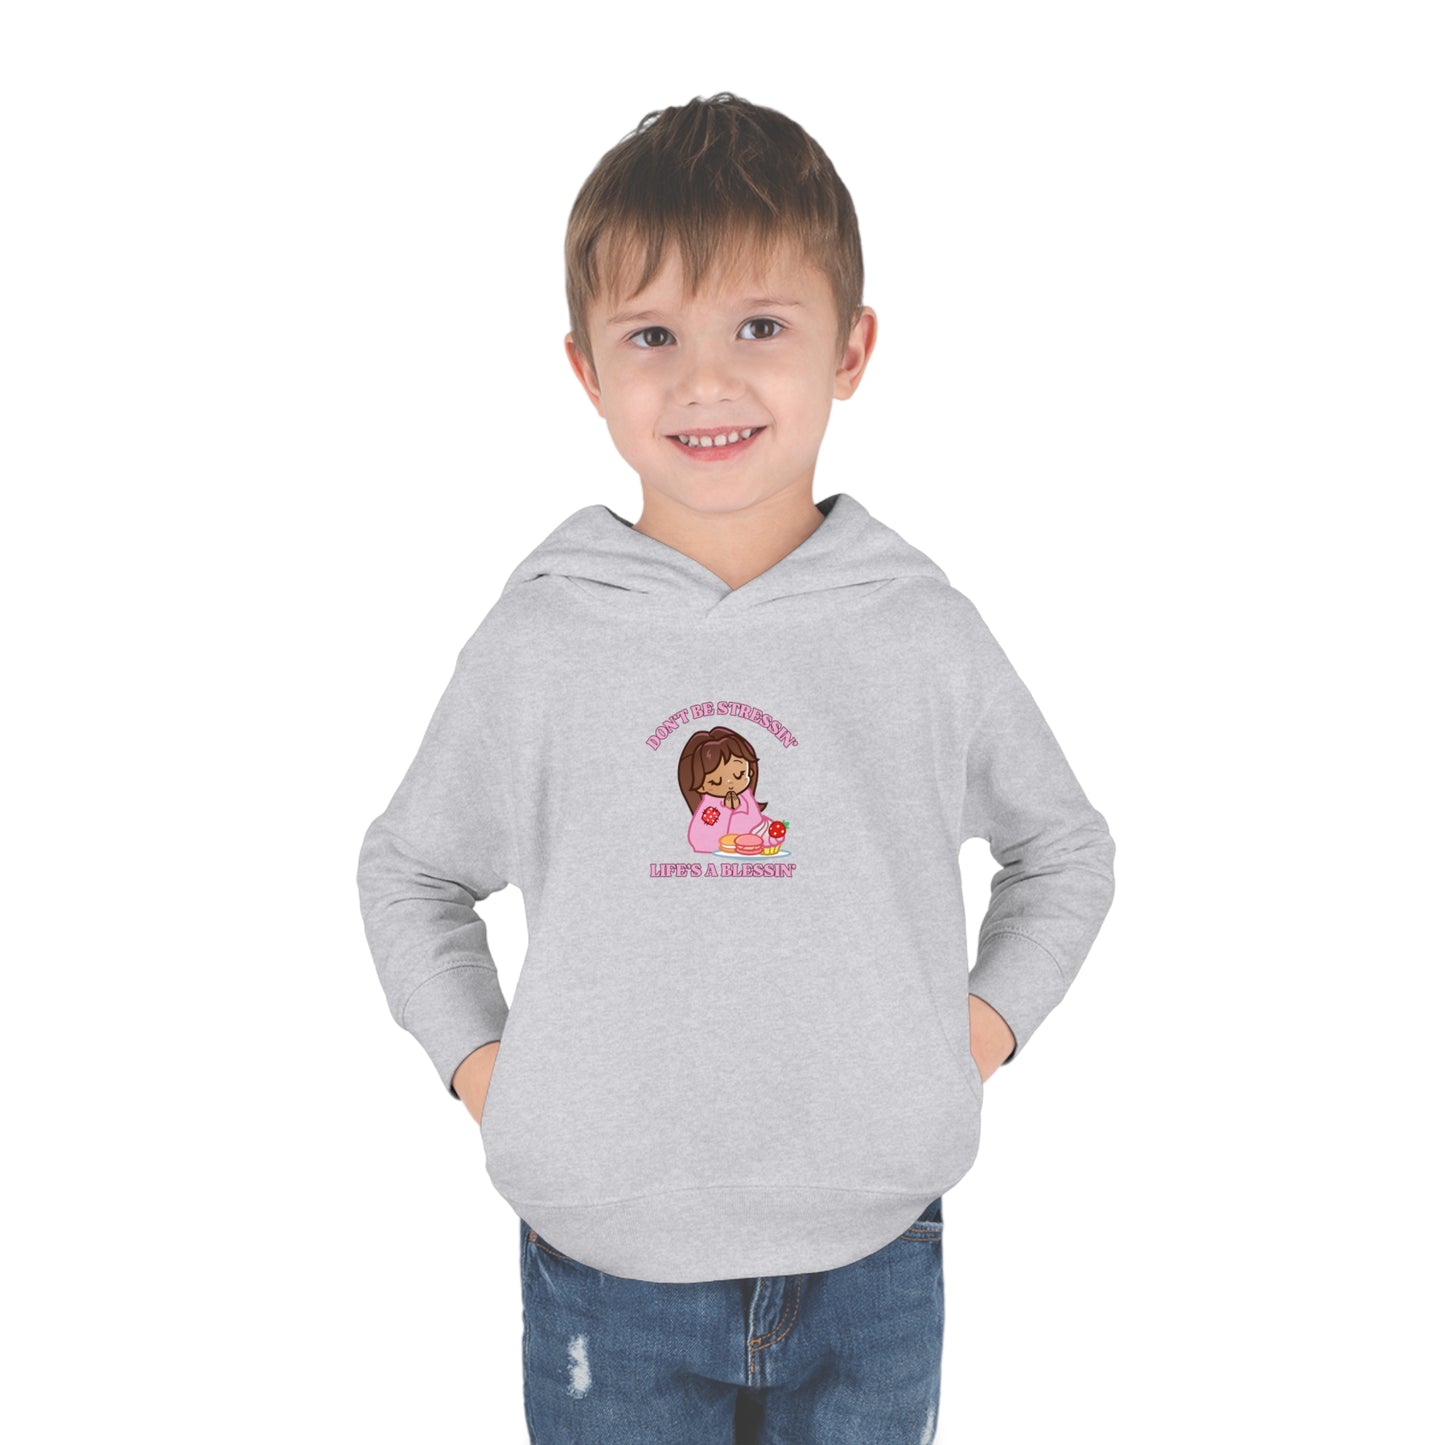 Life's A Blessing Kids Pullover Fleece Hoodie, Christian Pullover for Kids, Jesus Hoodie, Toddler & Youth Faith Apparel, Kids Cute Faith Hoodie